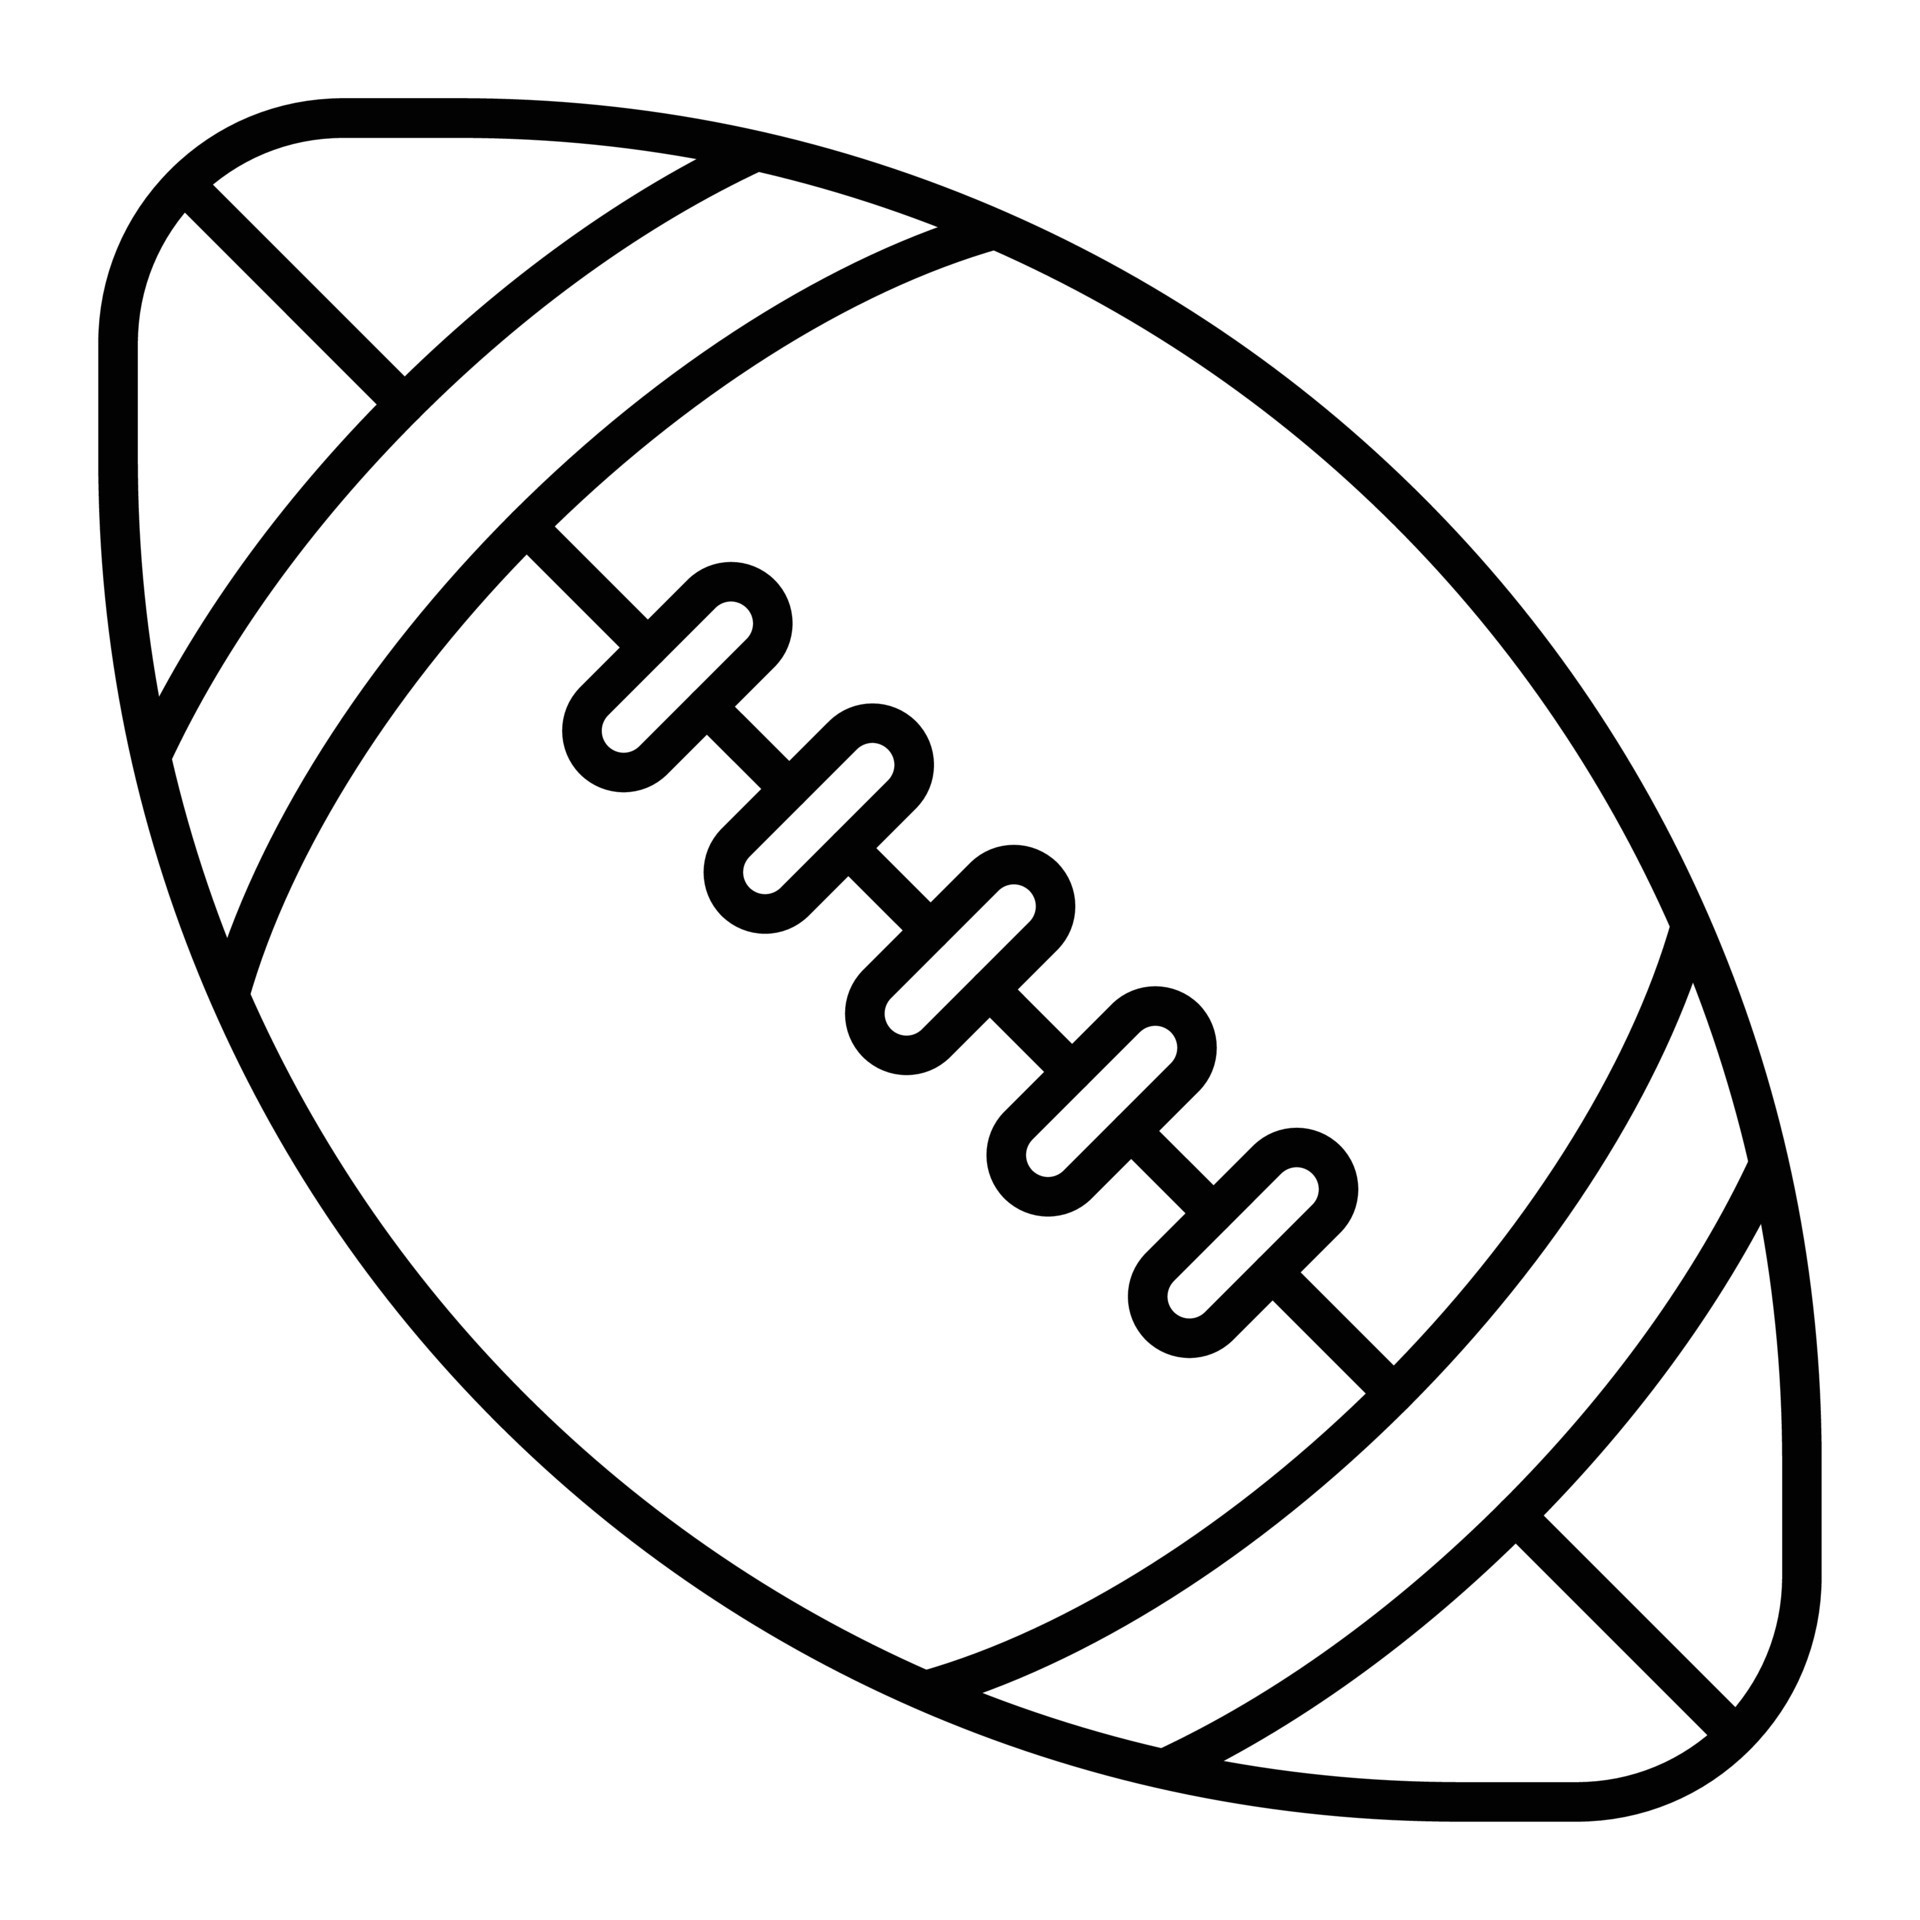 How to Draw a Football American Ball Easy - YouTube